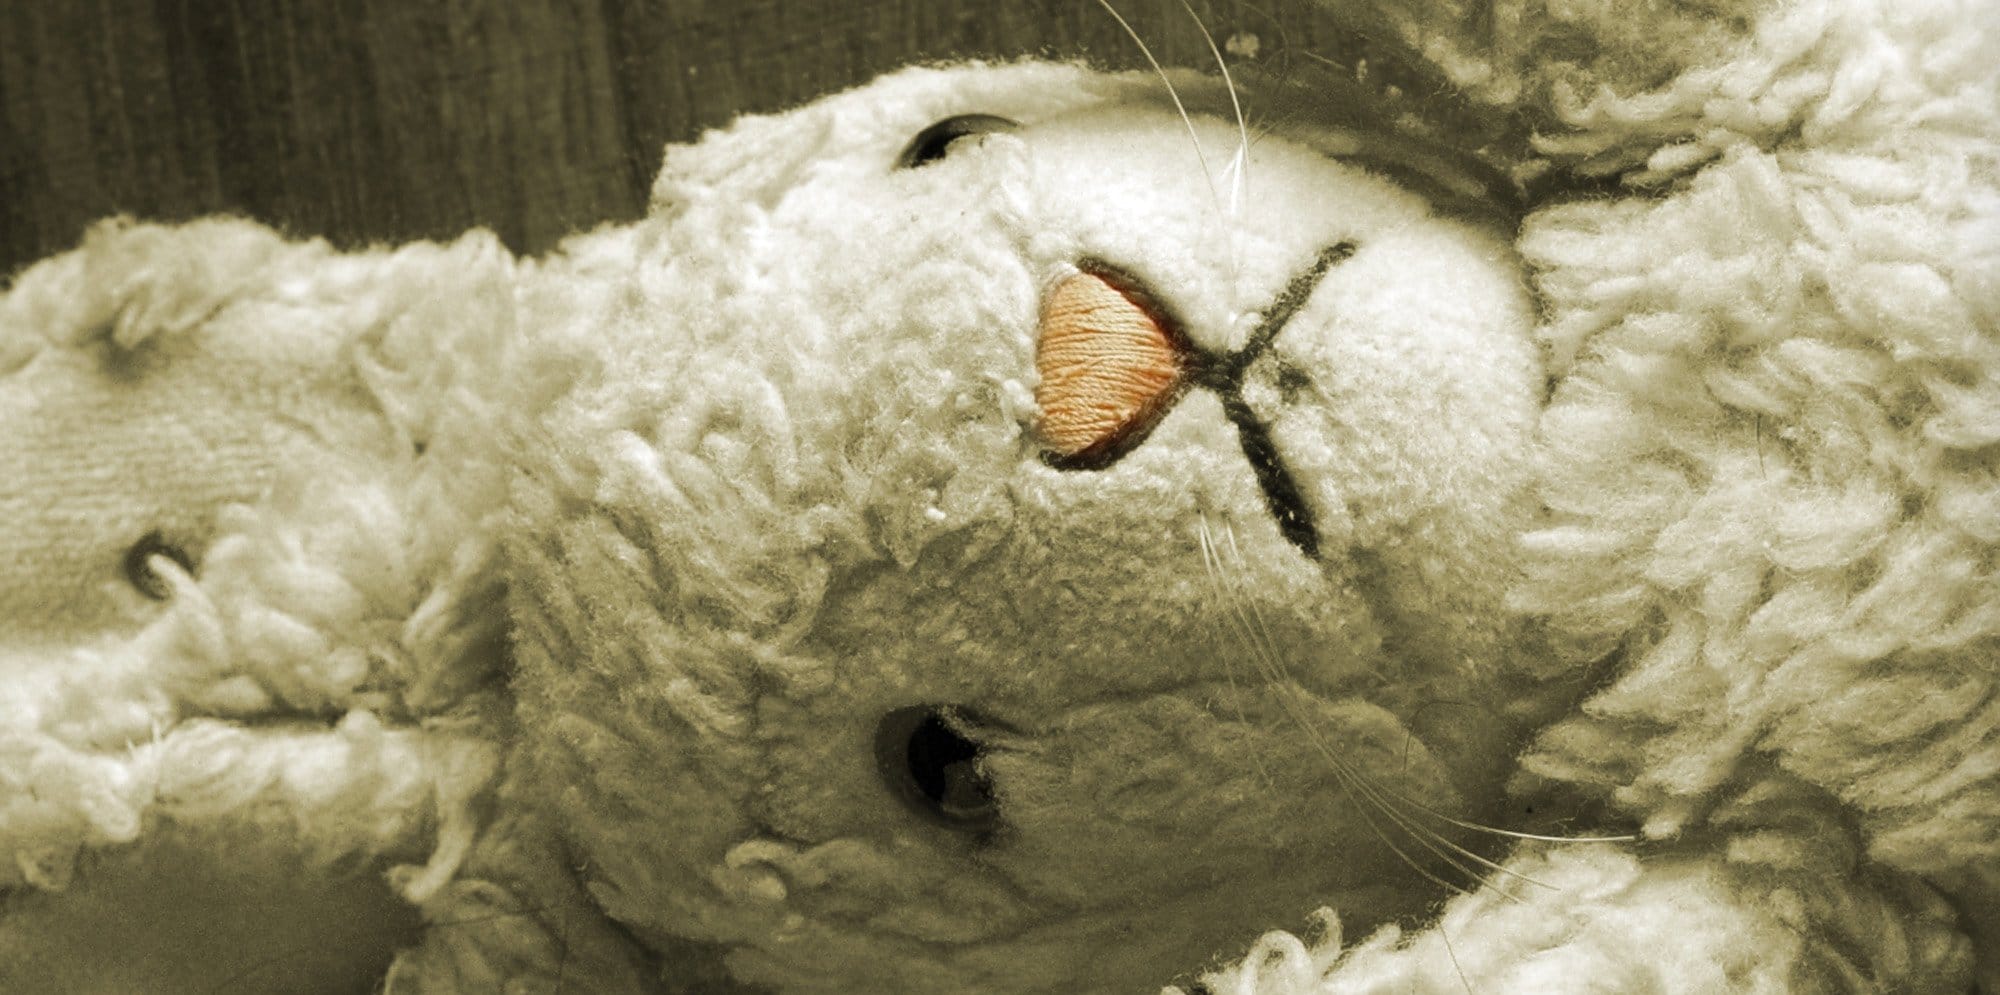 A white stuffed rabbit toy lays sideways on a wooden background. The image has a dulled sepia tone.